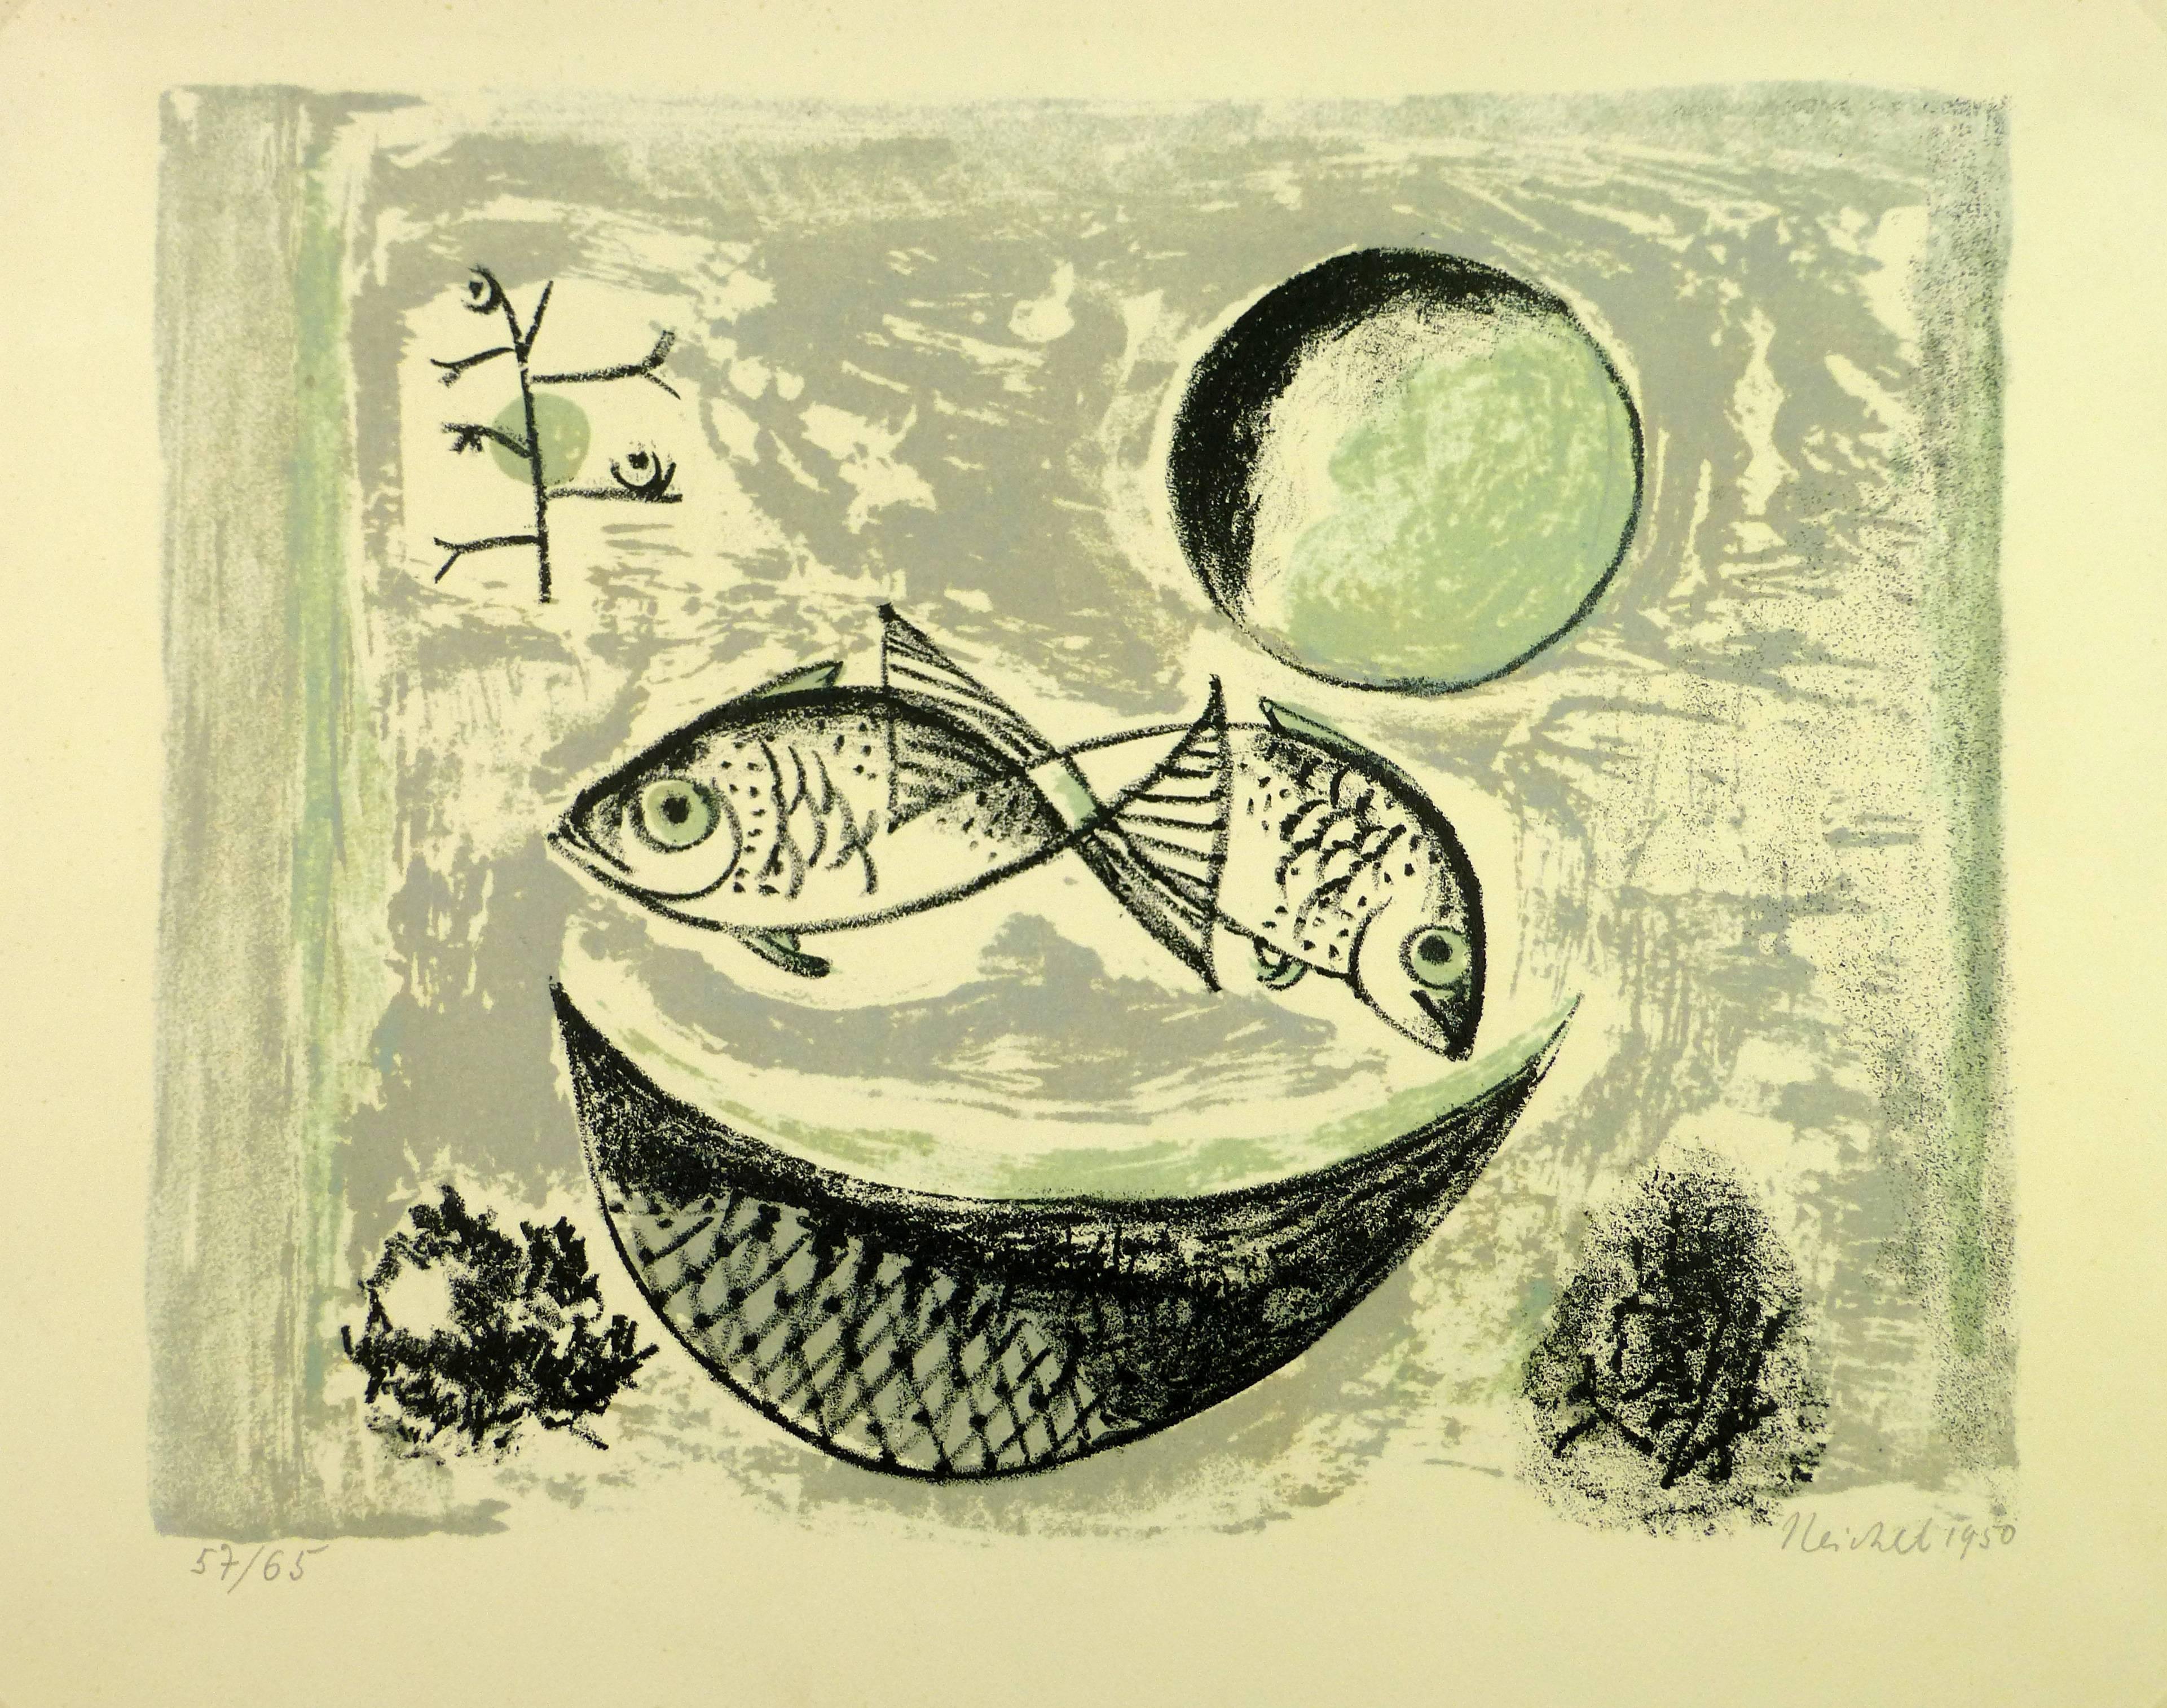 Unknown Abstract Print - Pair of Fishes in Black and Green